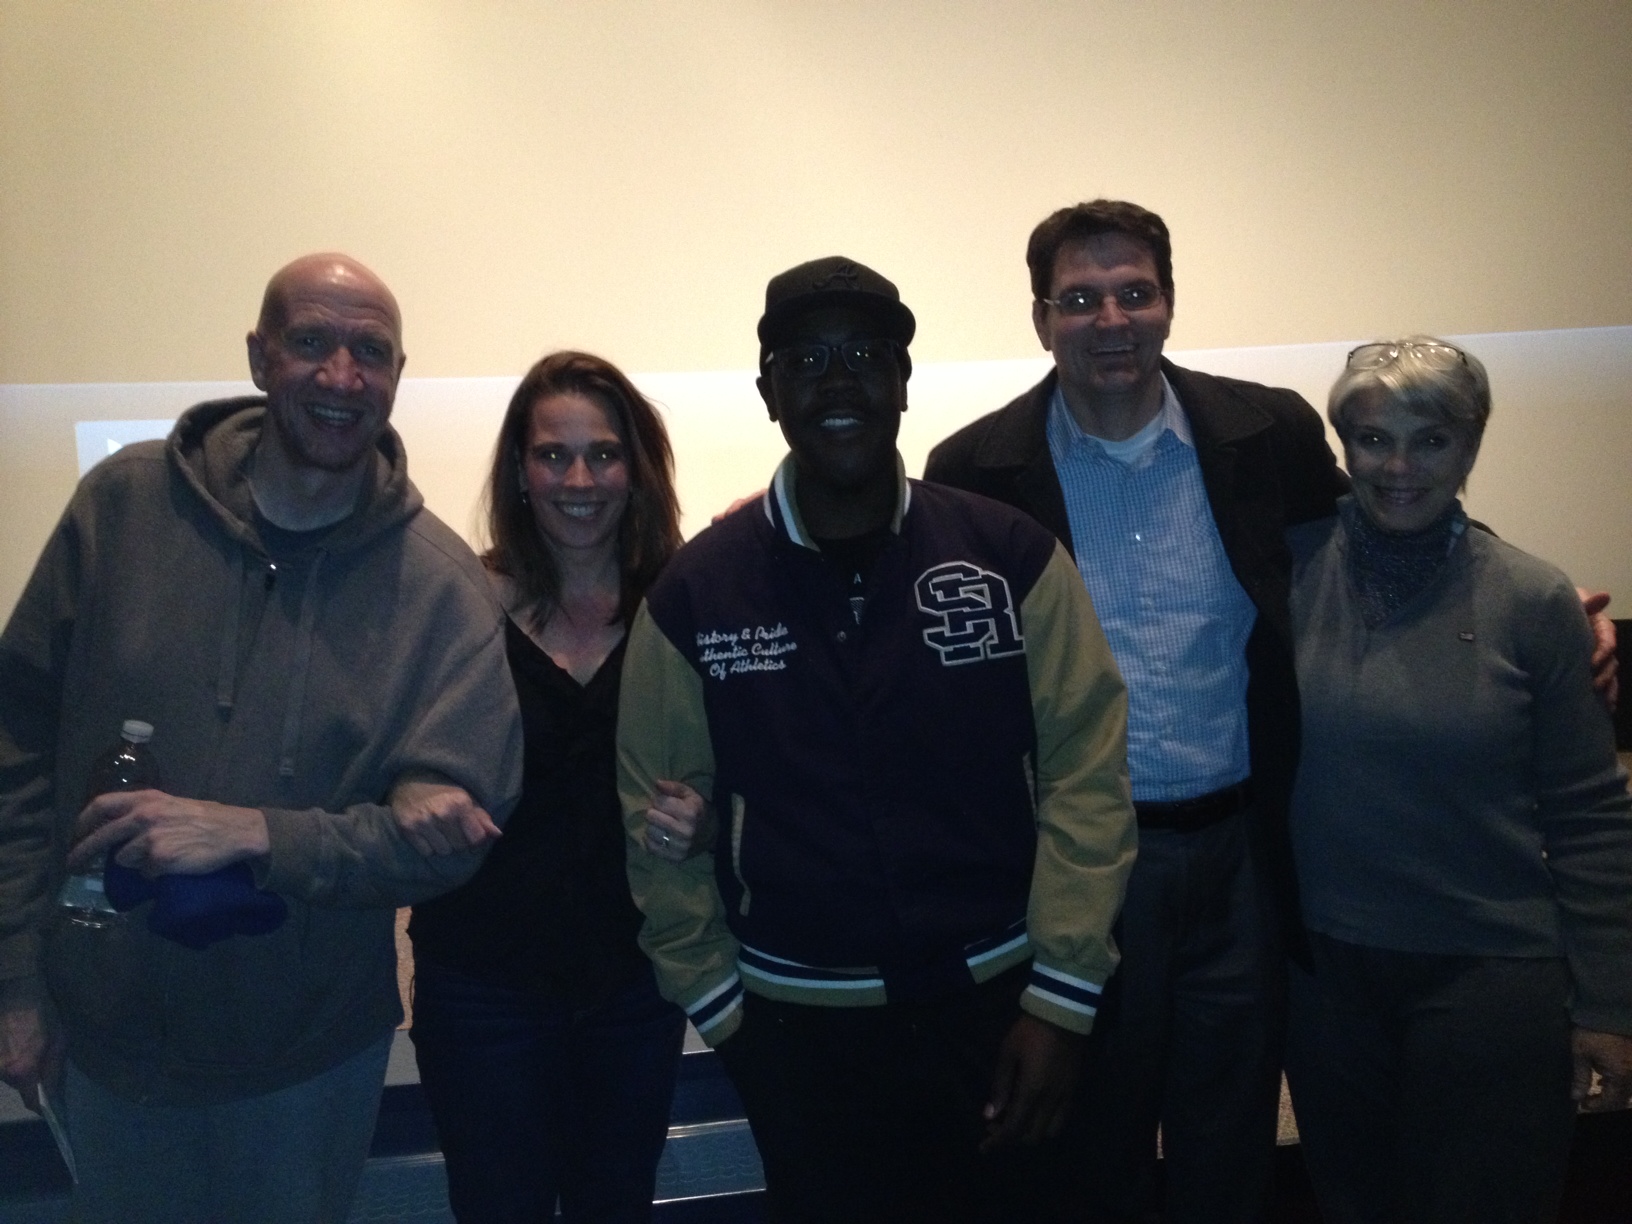 With cast members Tim Peck, Bennett Rodgers, Brenda Bass and director, Bobby Huntley, of Tuesday Sunrise